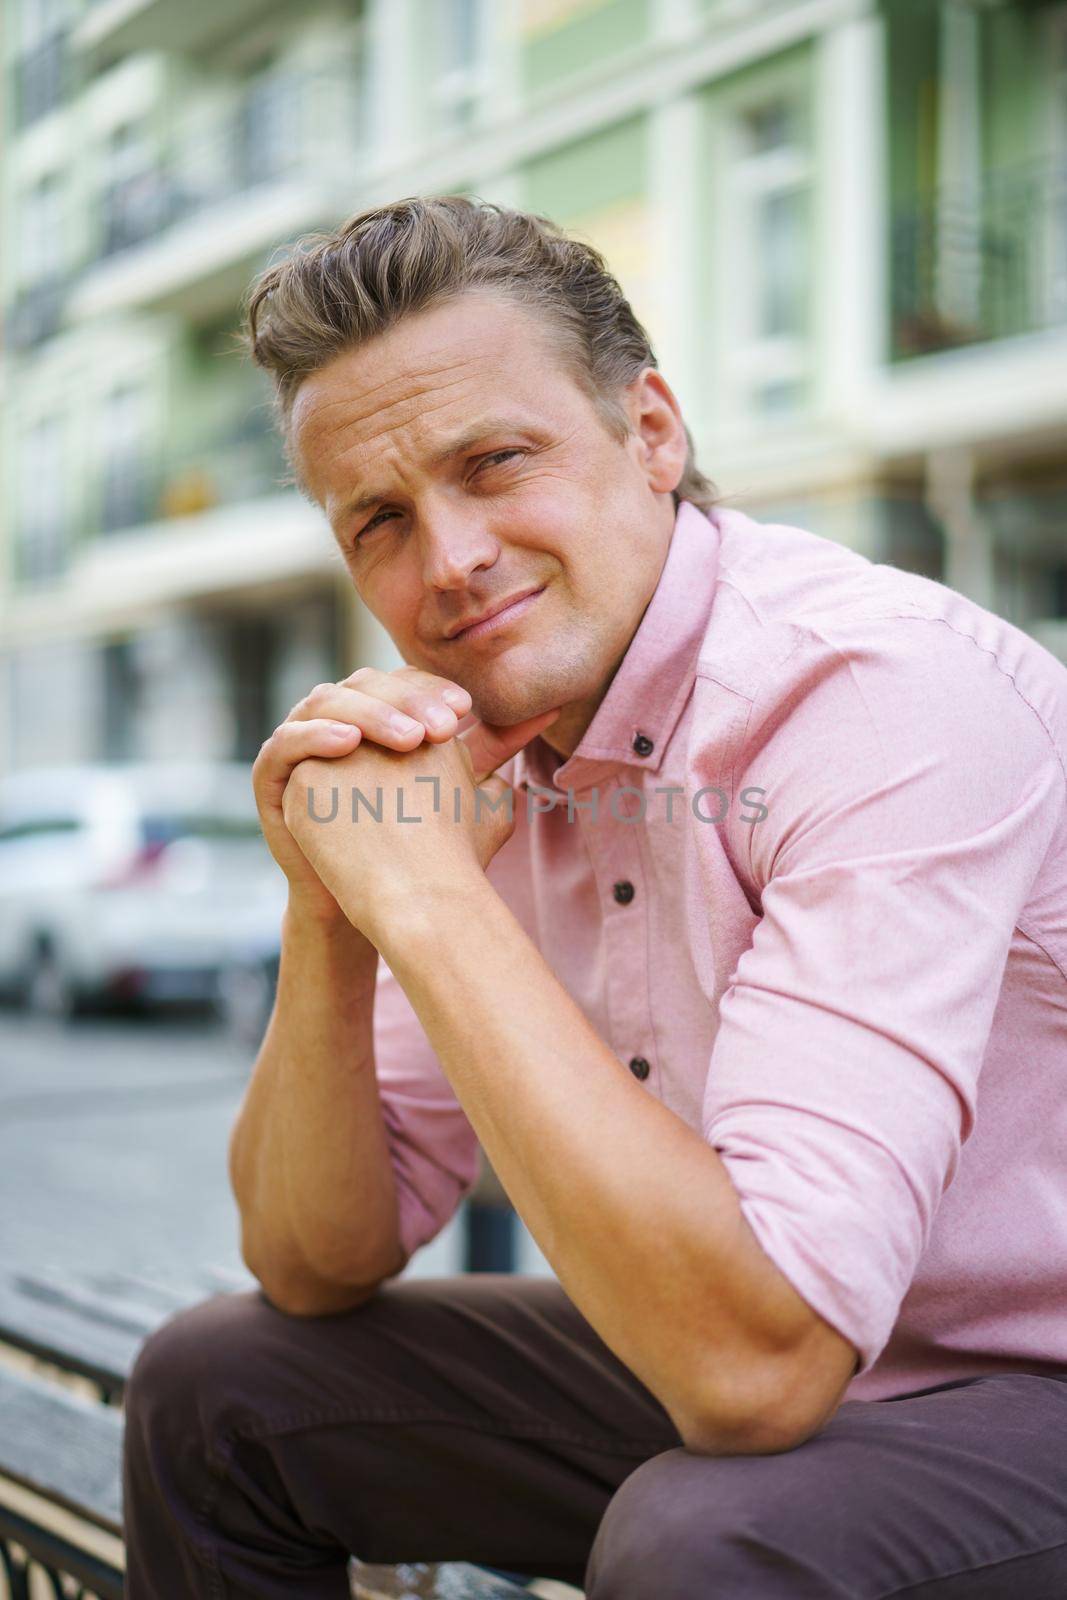 Handsome man spend time sitting on the bench in urban city with hands put together and leaned chin looking at camera, wearing pink shirt. Smiling freelancer caucasian man off work.